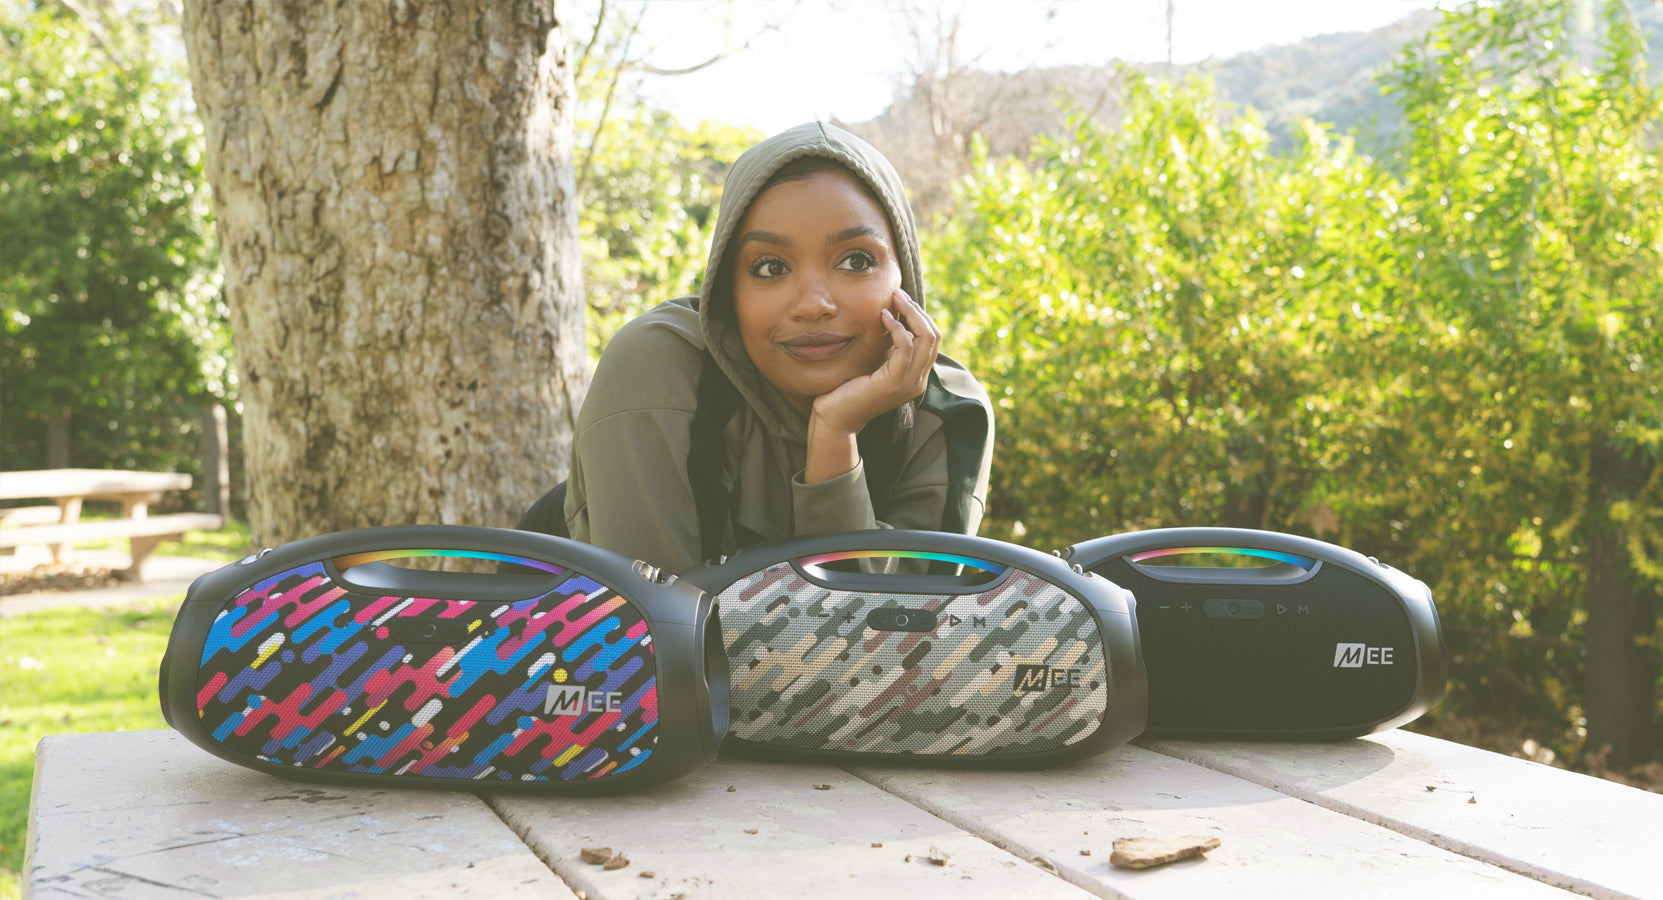 A young woman in a hijab smiling by a wooden table, with three colorful portable speakers in front of her, outdoors with trees and sunlight in the background.